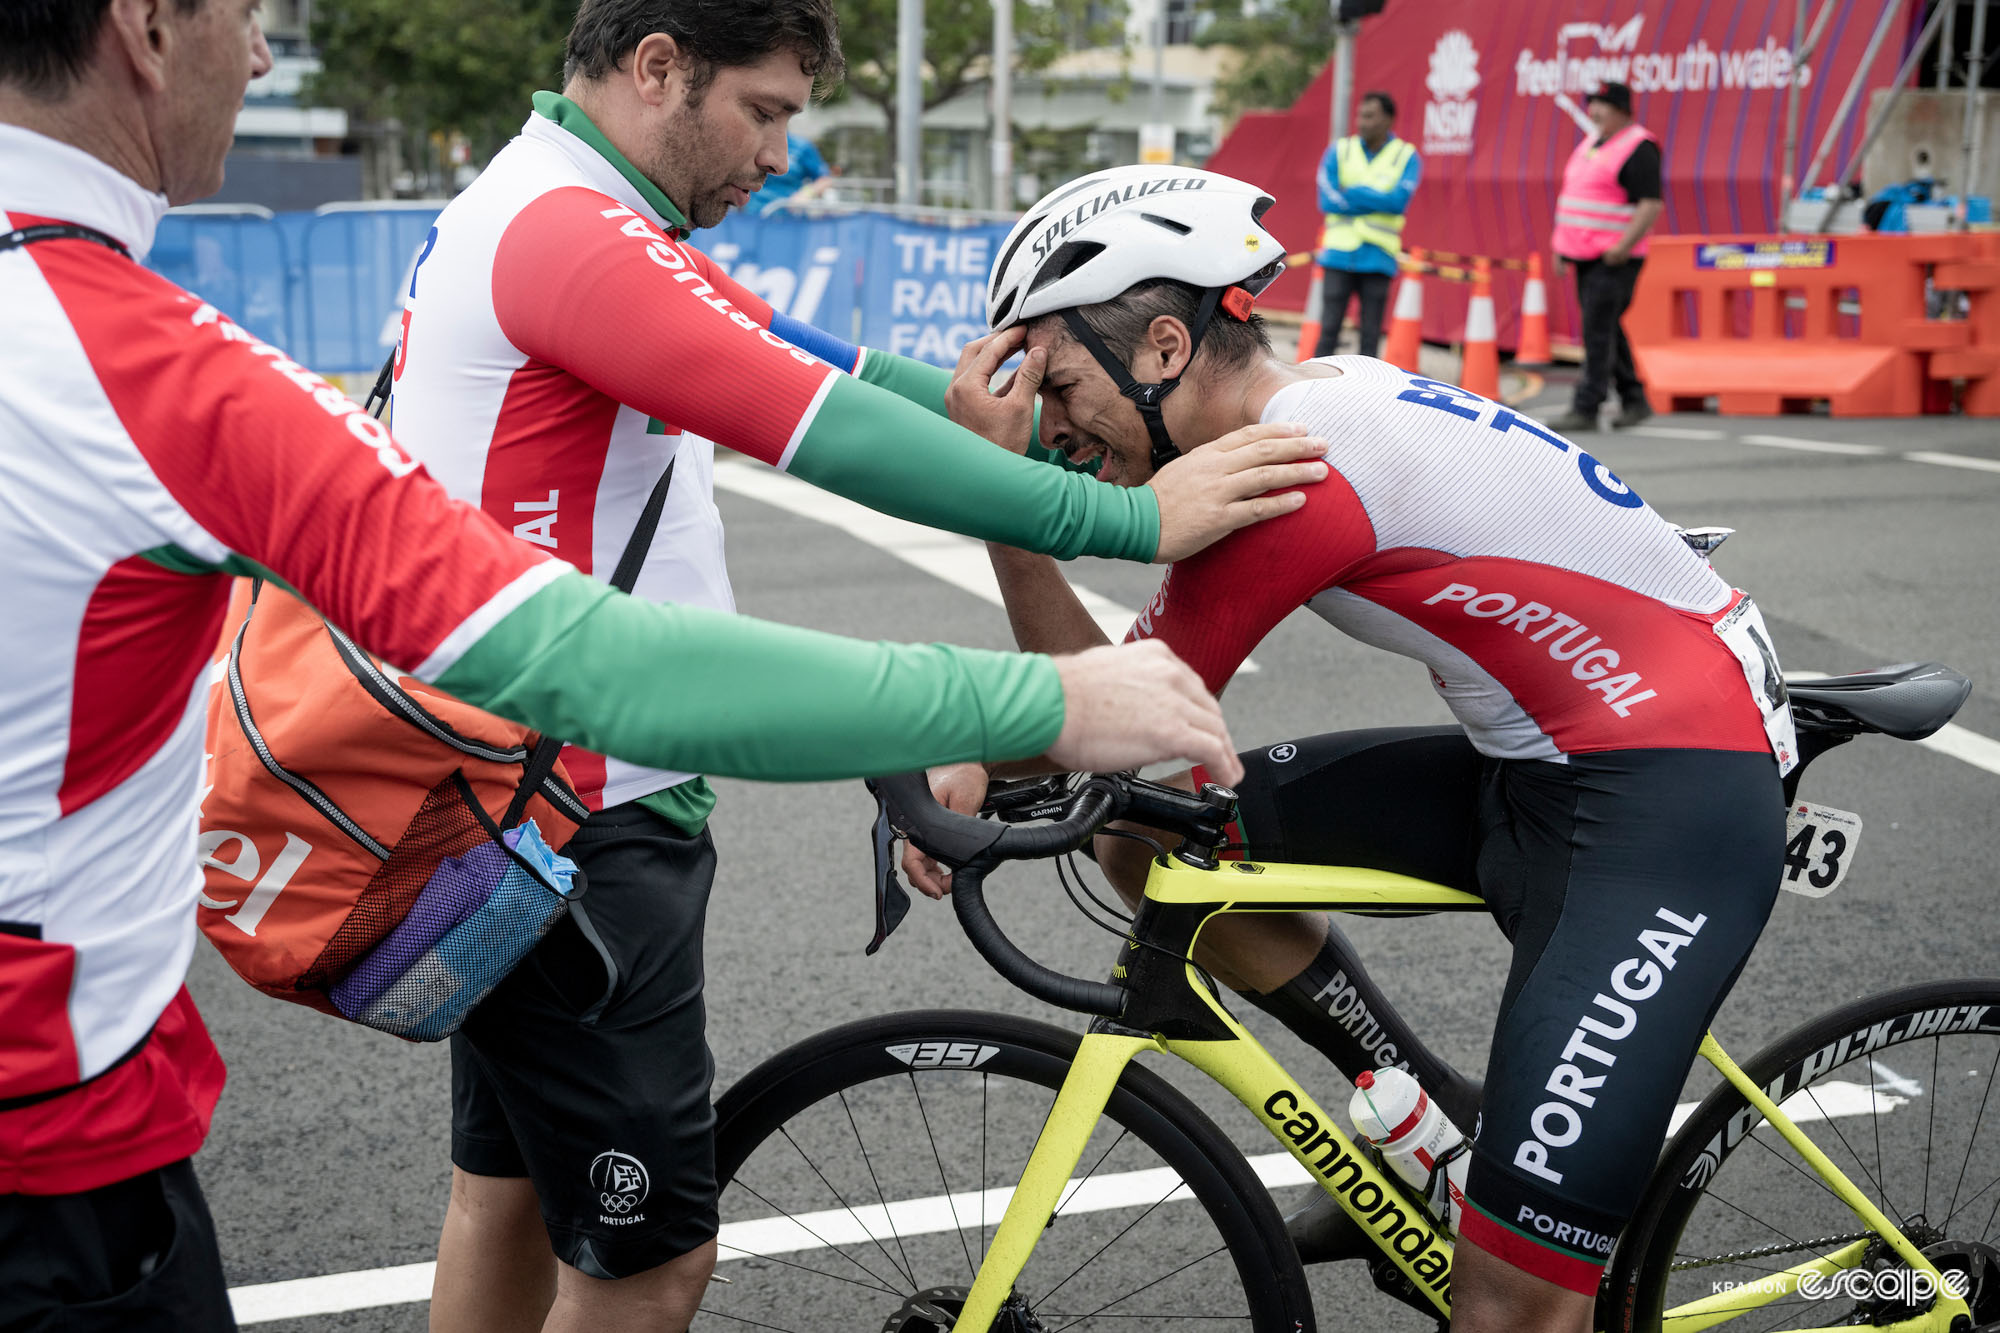 António Morgado sobs, his head in his hands, comforted by a Portugal team soigneur. 